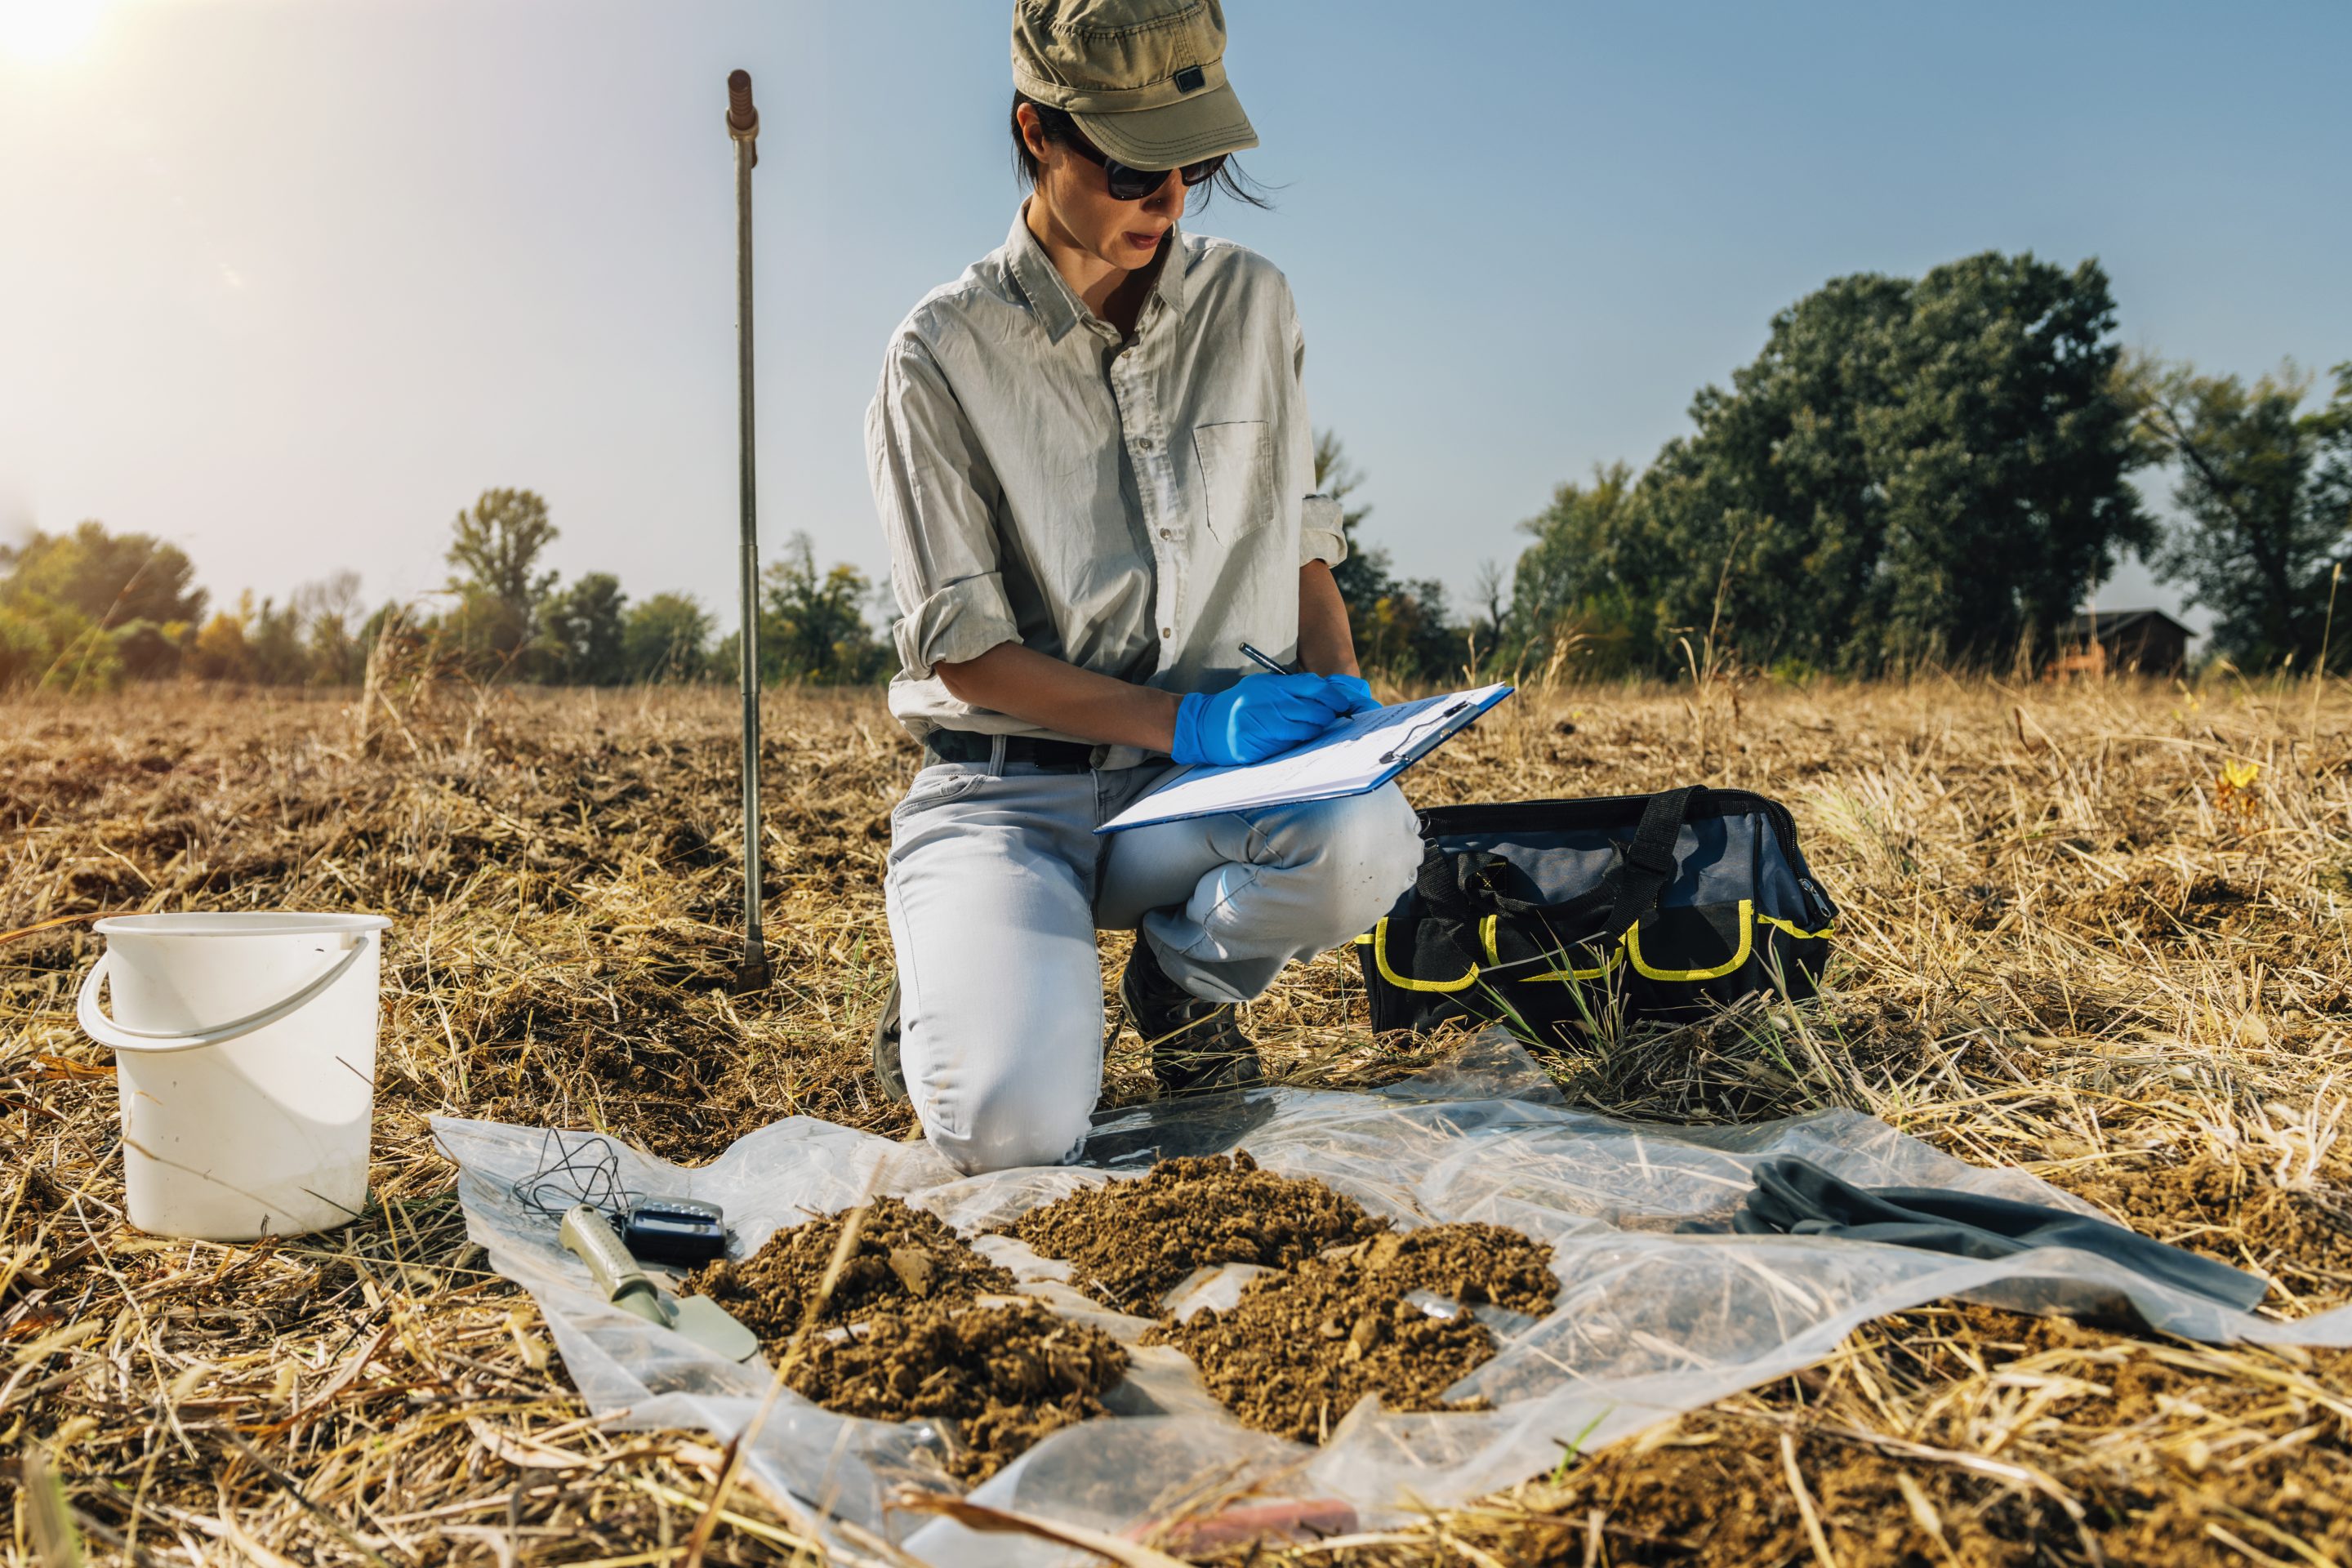 A womain writing notes on a clipboard during a soil survey in an open field.